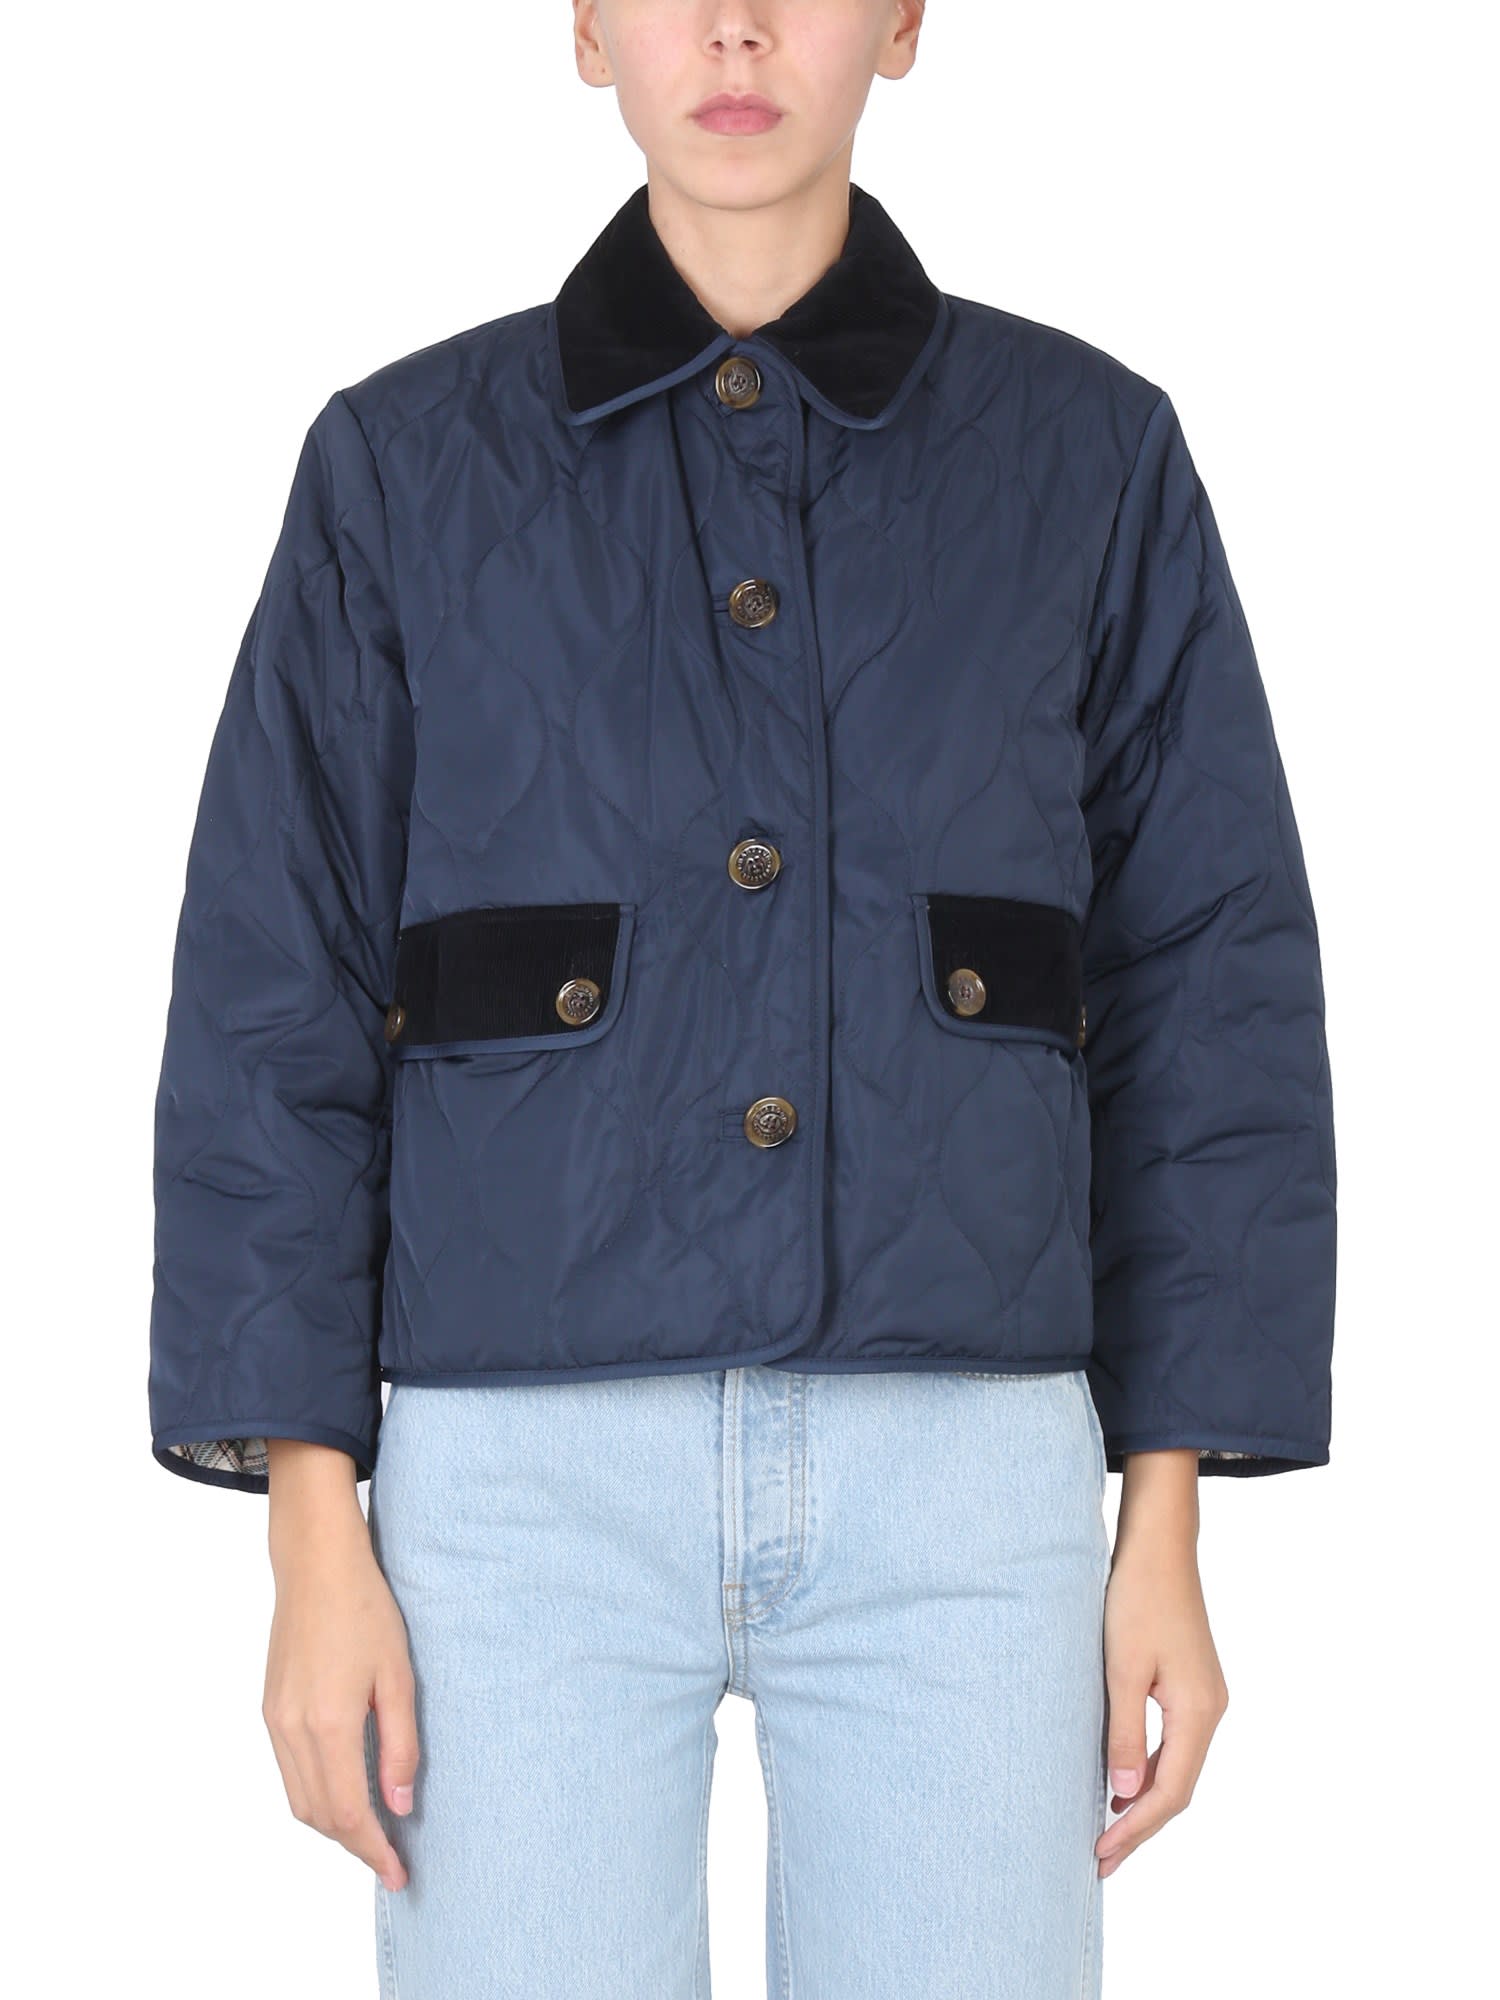 Barbour Quilted Jacket By Alexa Chung